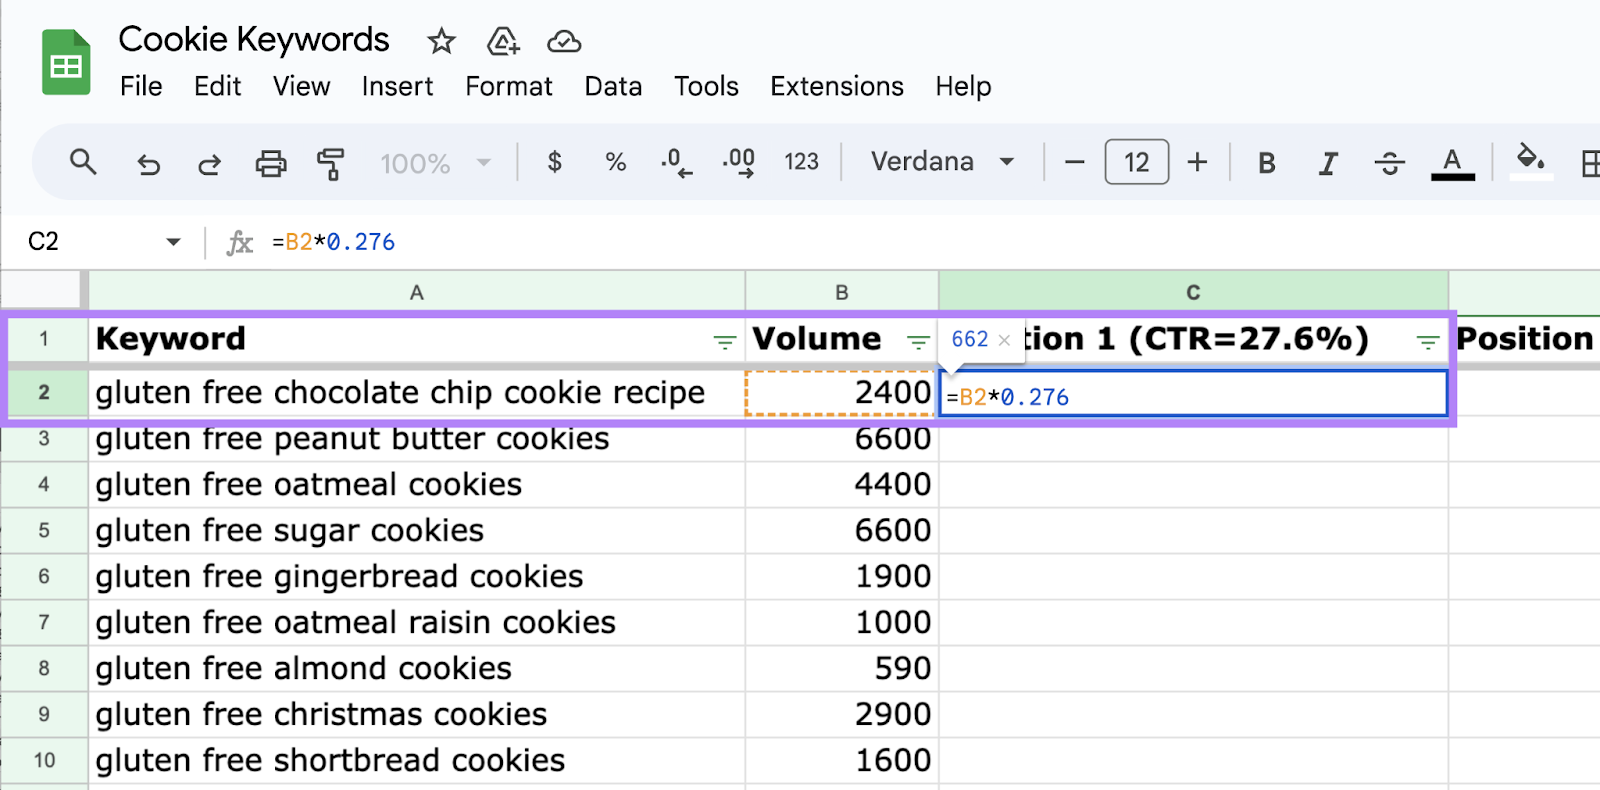 Calculating the CTR in the Google spreadsheet